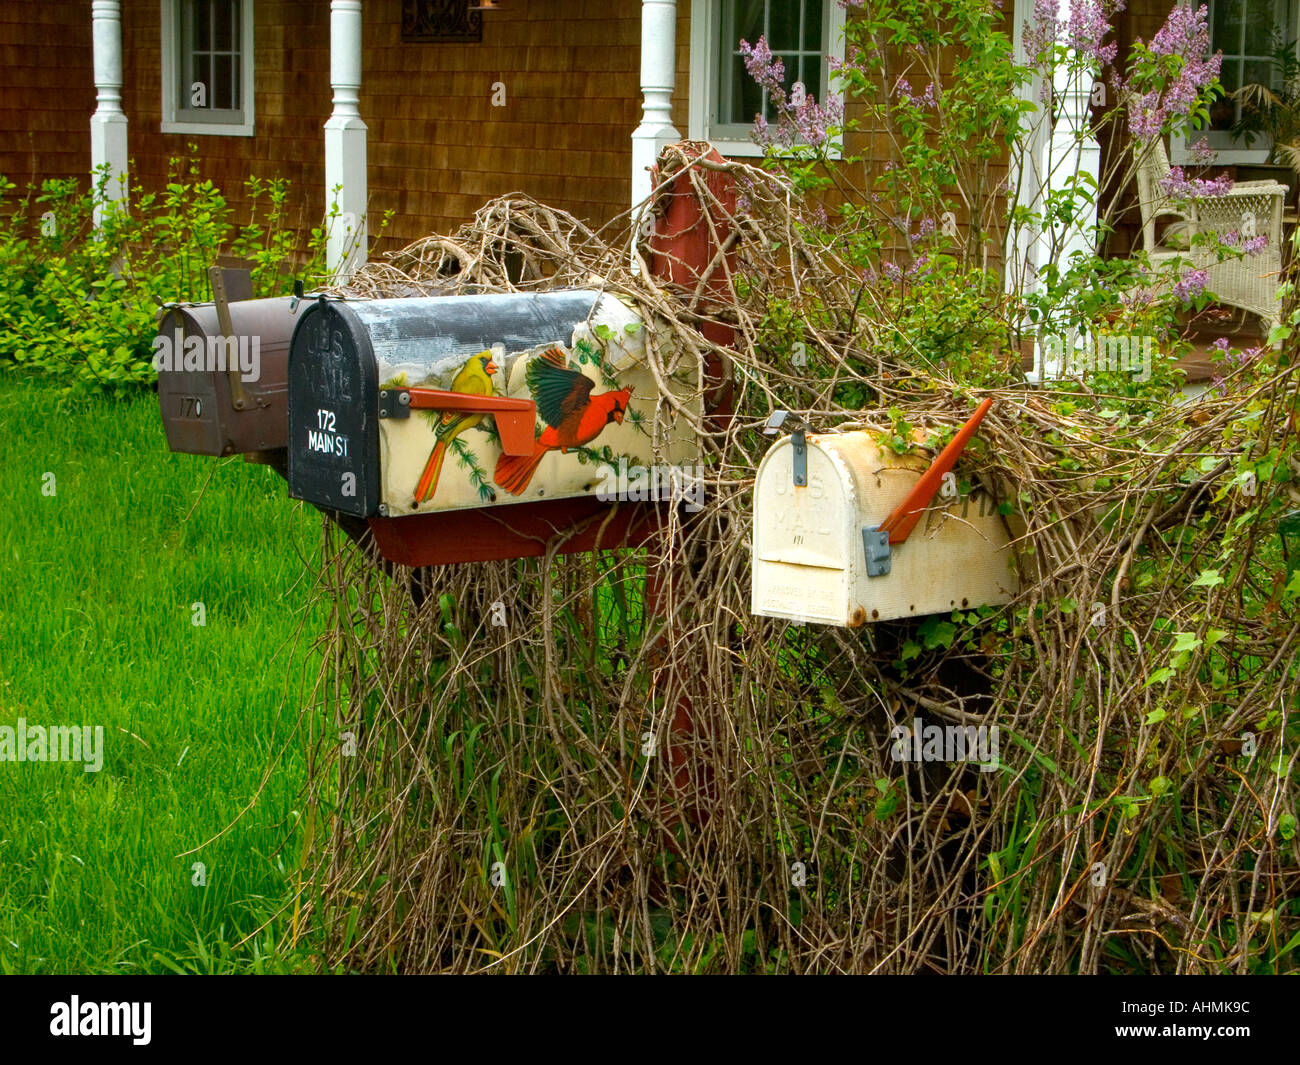 Mailboxes outside house in Sandwich Cape Cod Massachussetts usa Stock Photo